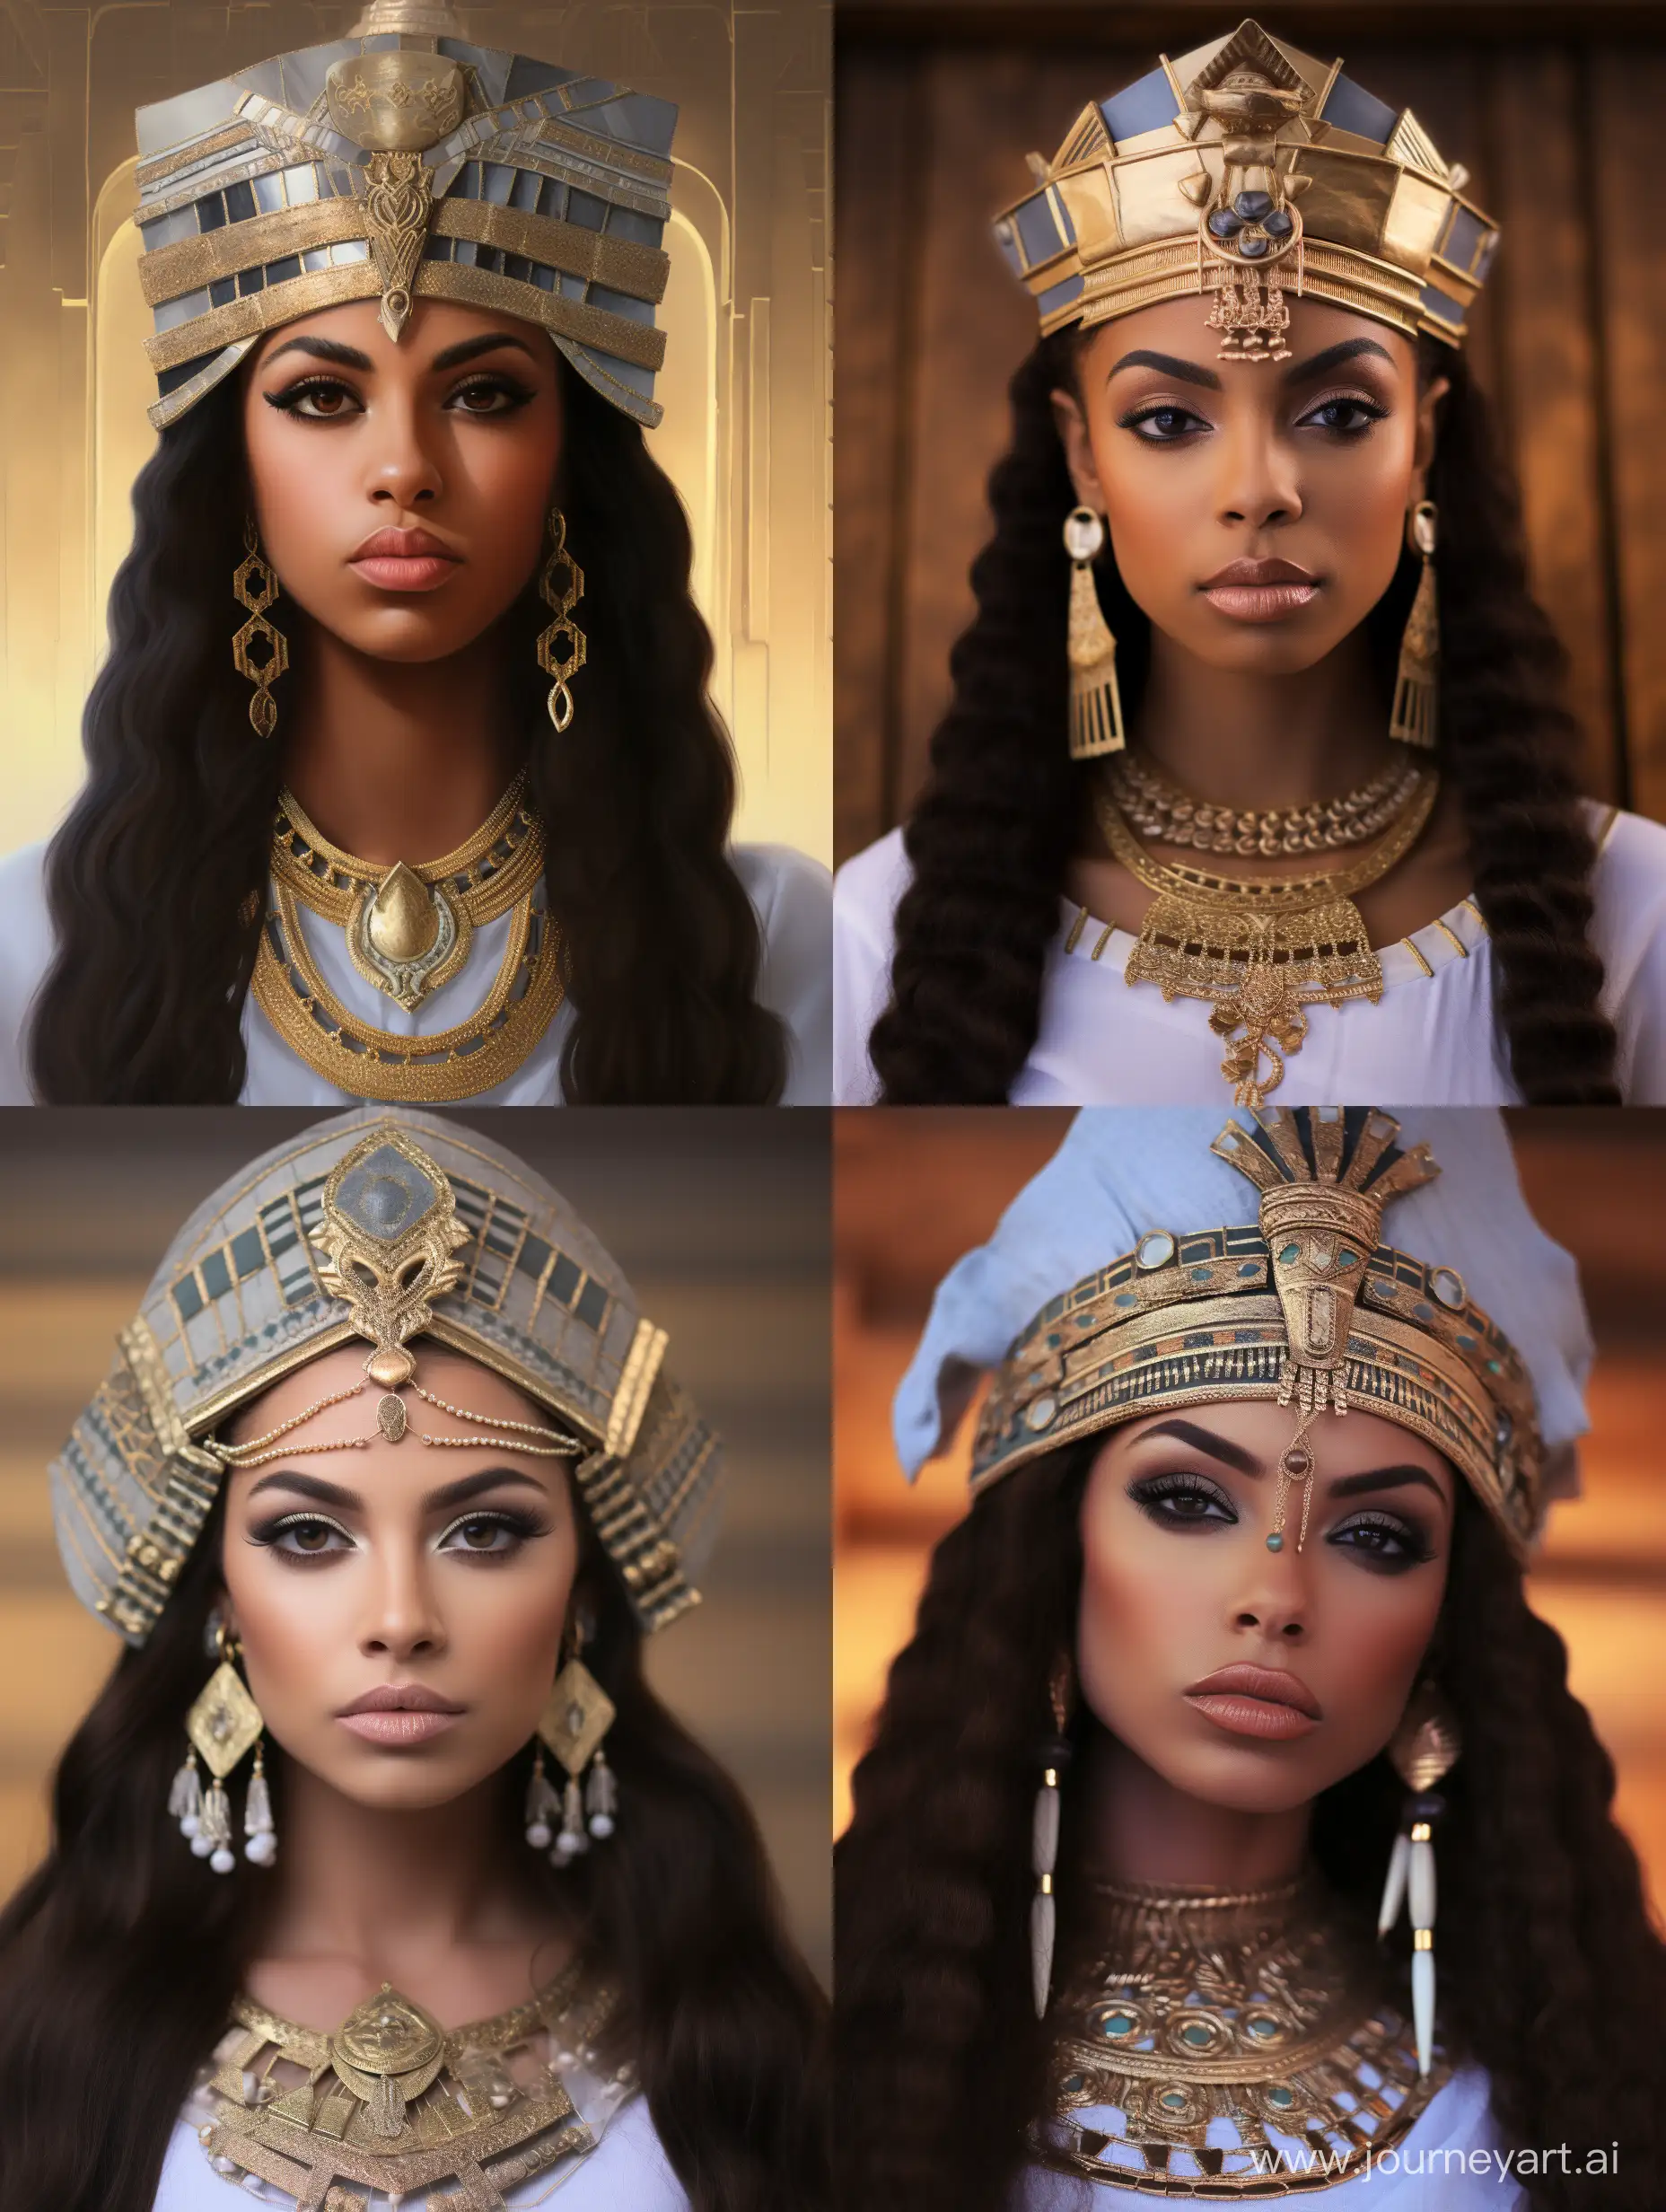 Exquisite-Portrait-of-an-Egyptian-Queen-in-Elegant-White-Robe-and-Gold-Chains